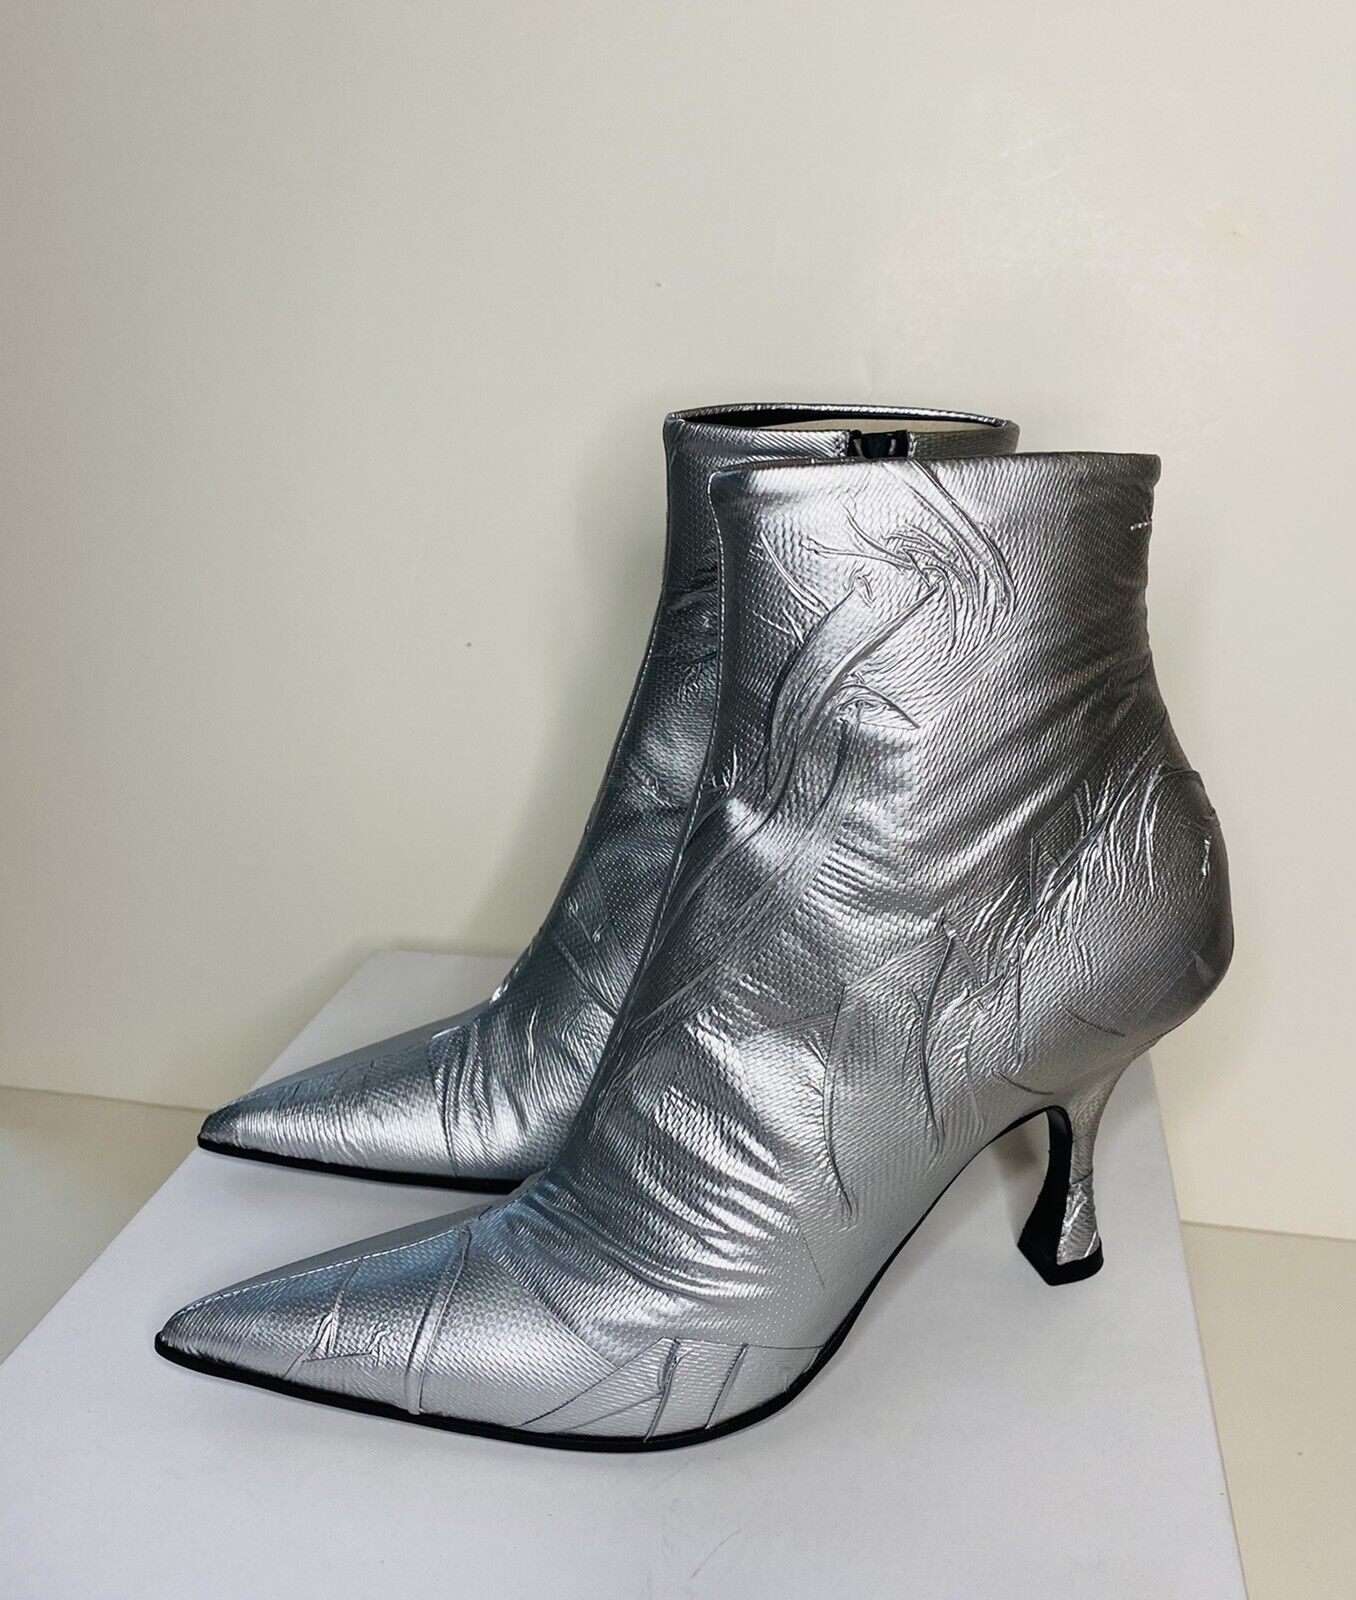 Maison Margiela MM6 Silver Duct Tape-Inspired Heeled Ankle Boot 